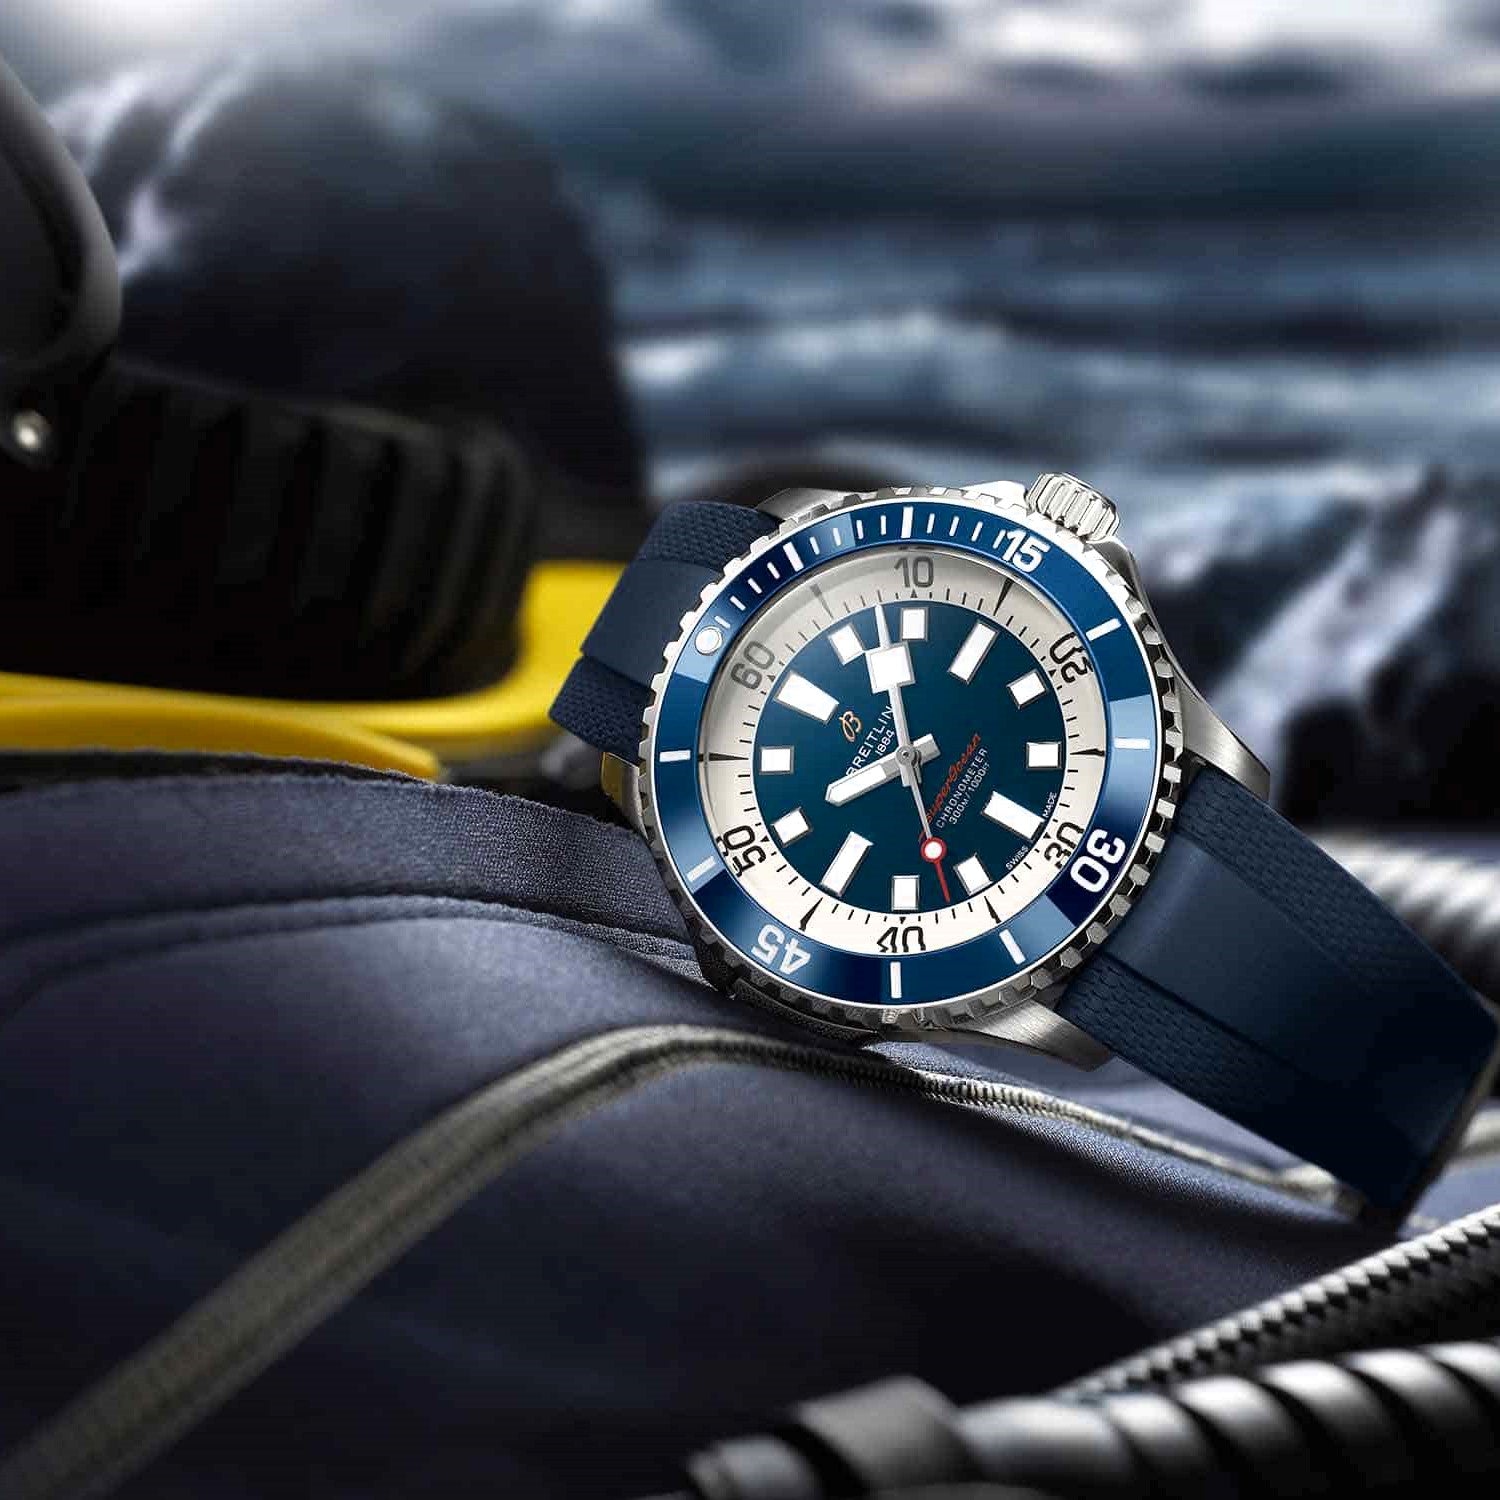 Is Breitling Superocean Worth the Investment? Read This Review!